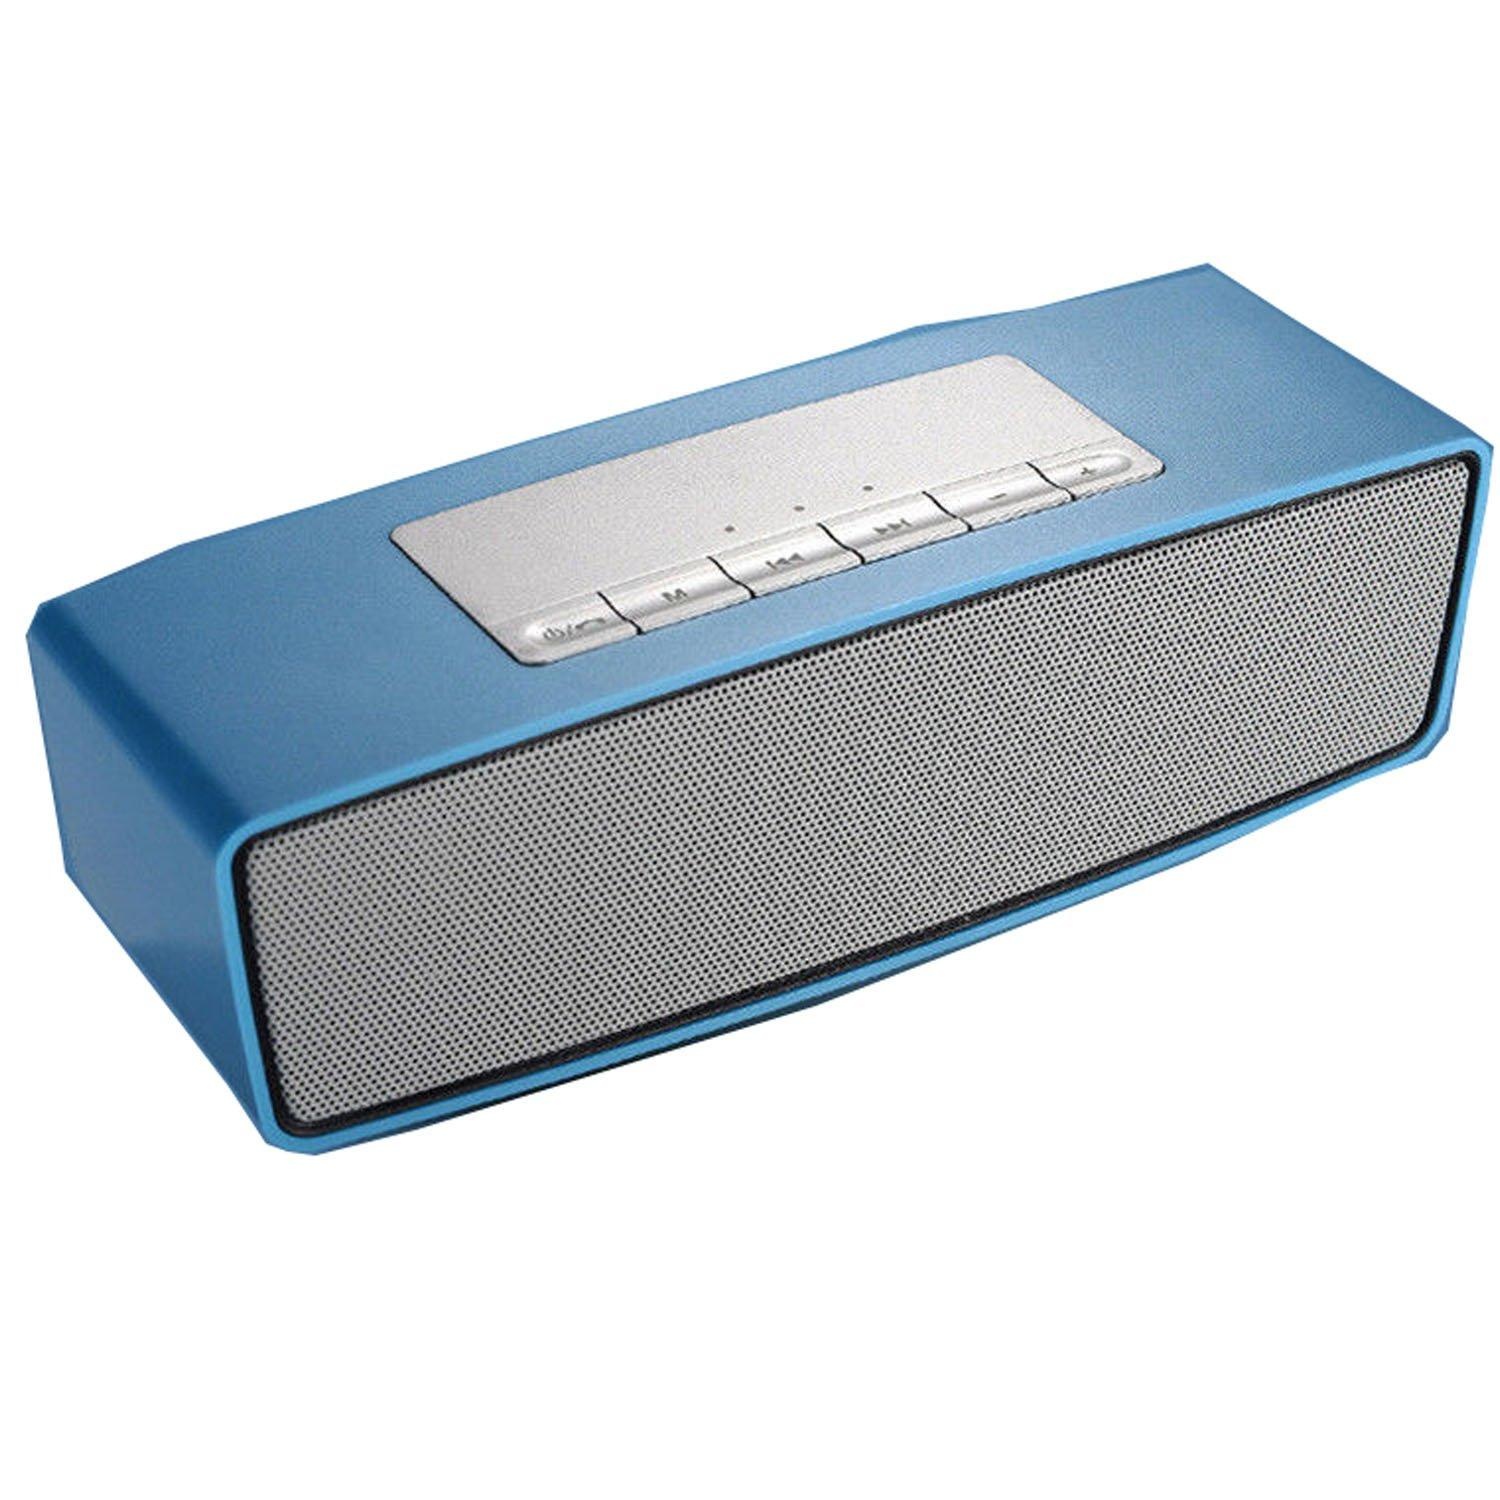 Portable Wireless Bluetooth Speaker Super Bass Stereo for Smart Phone Tablet PC (blue)